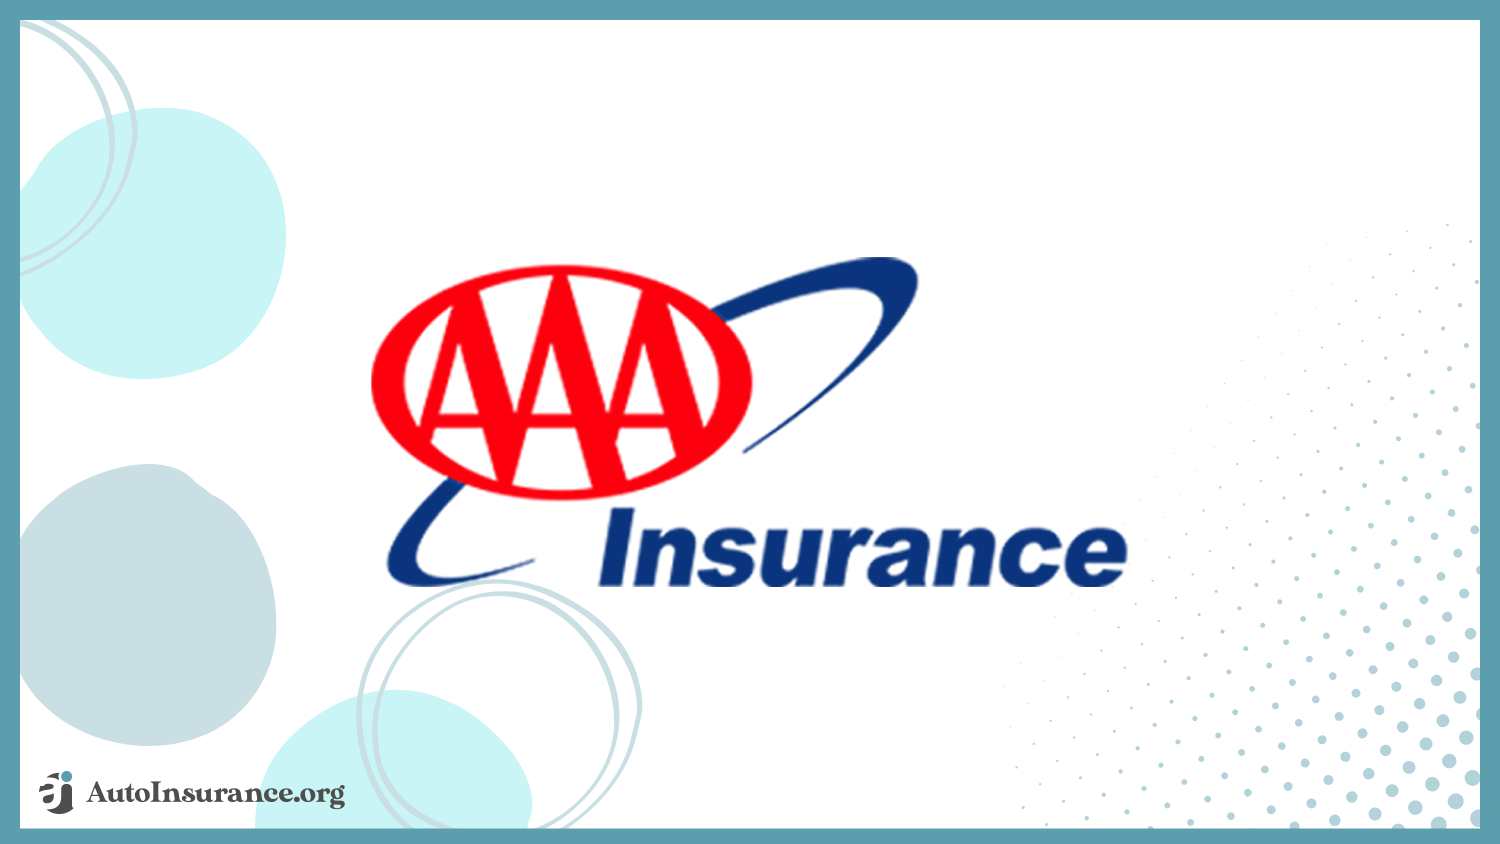 AAA: Best Auto Insurance for International Drivers